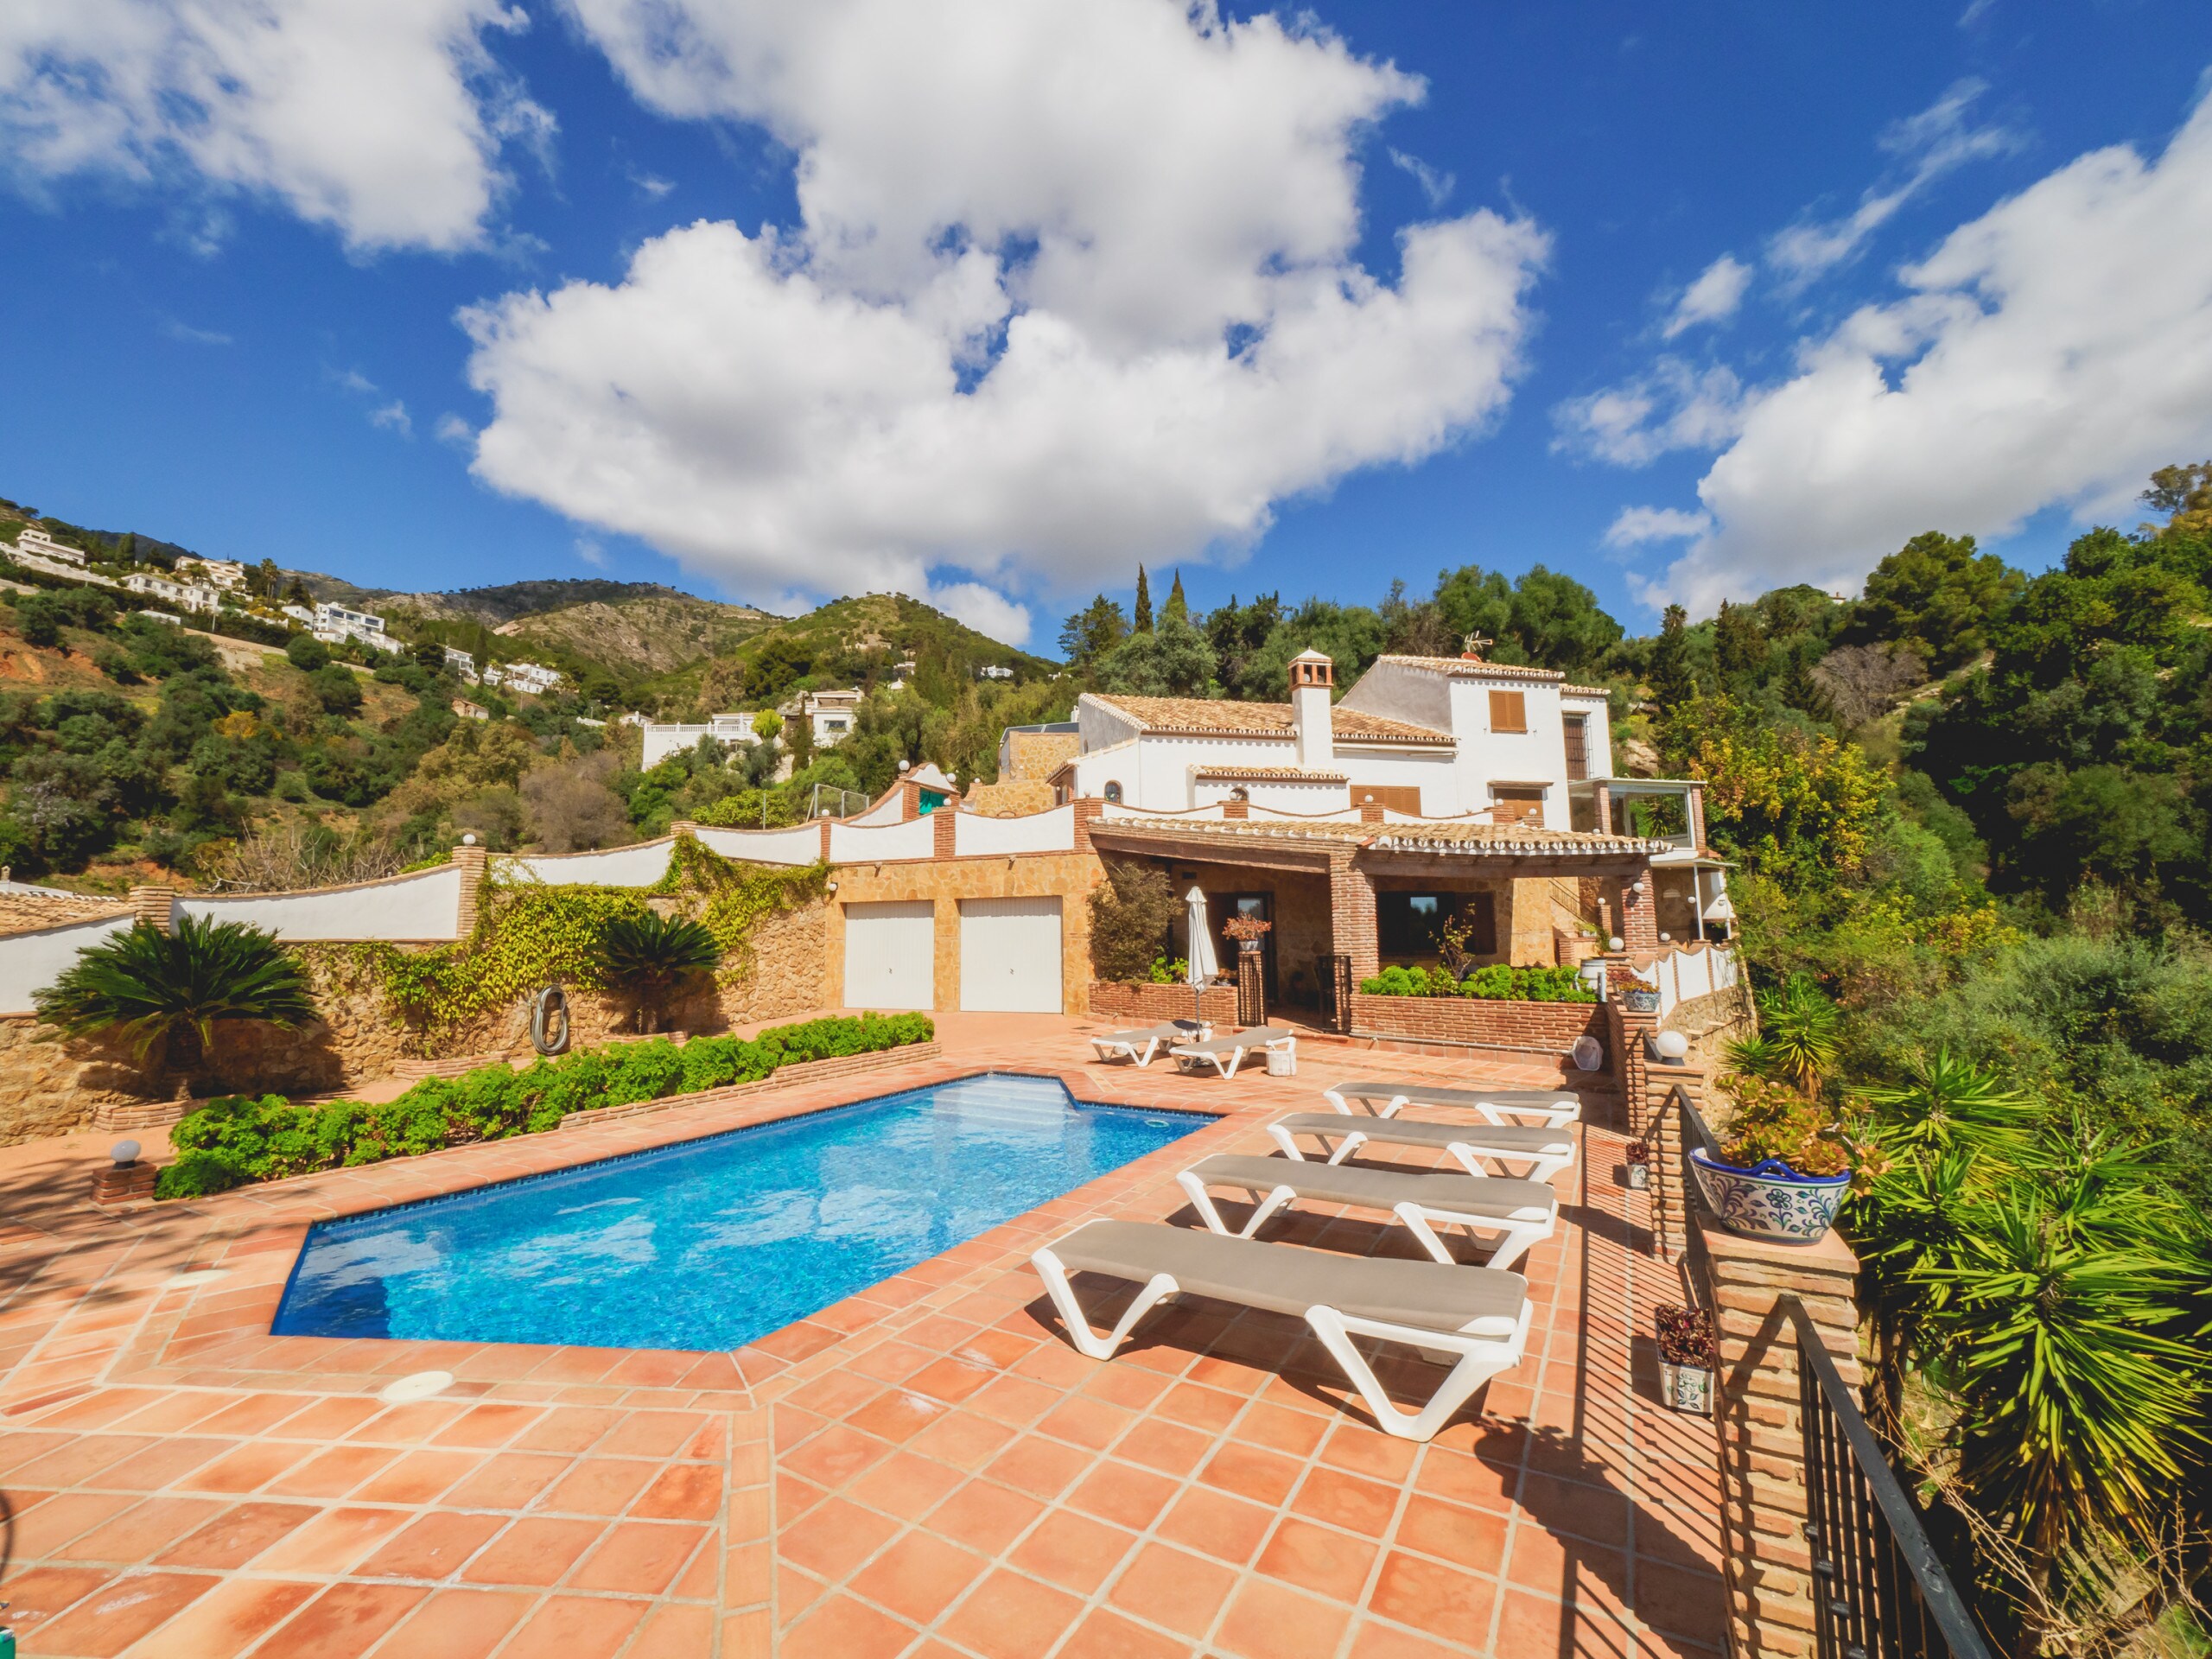 Family accommodation in the area of Valtocado, Mijas. Ideal to rest and with very nice sea views.